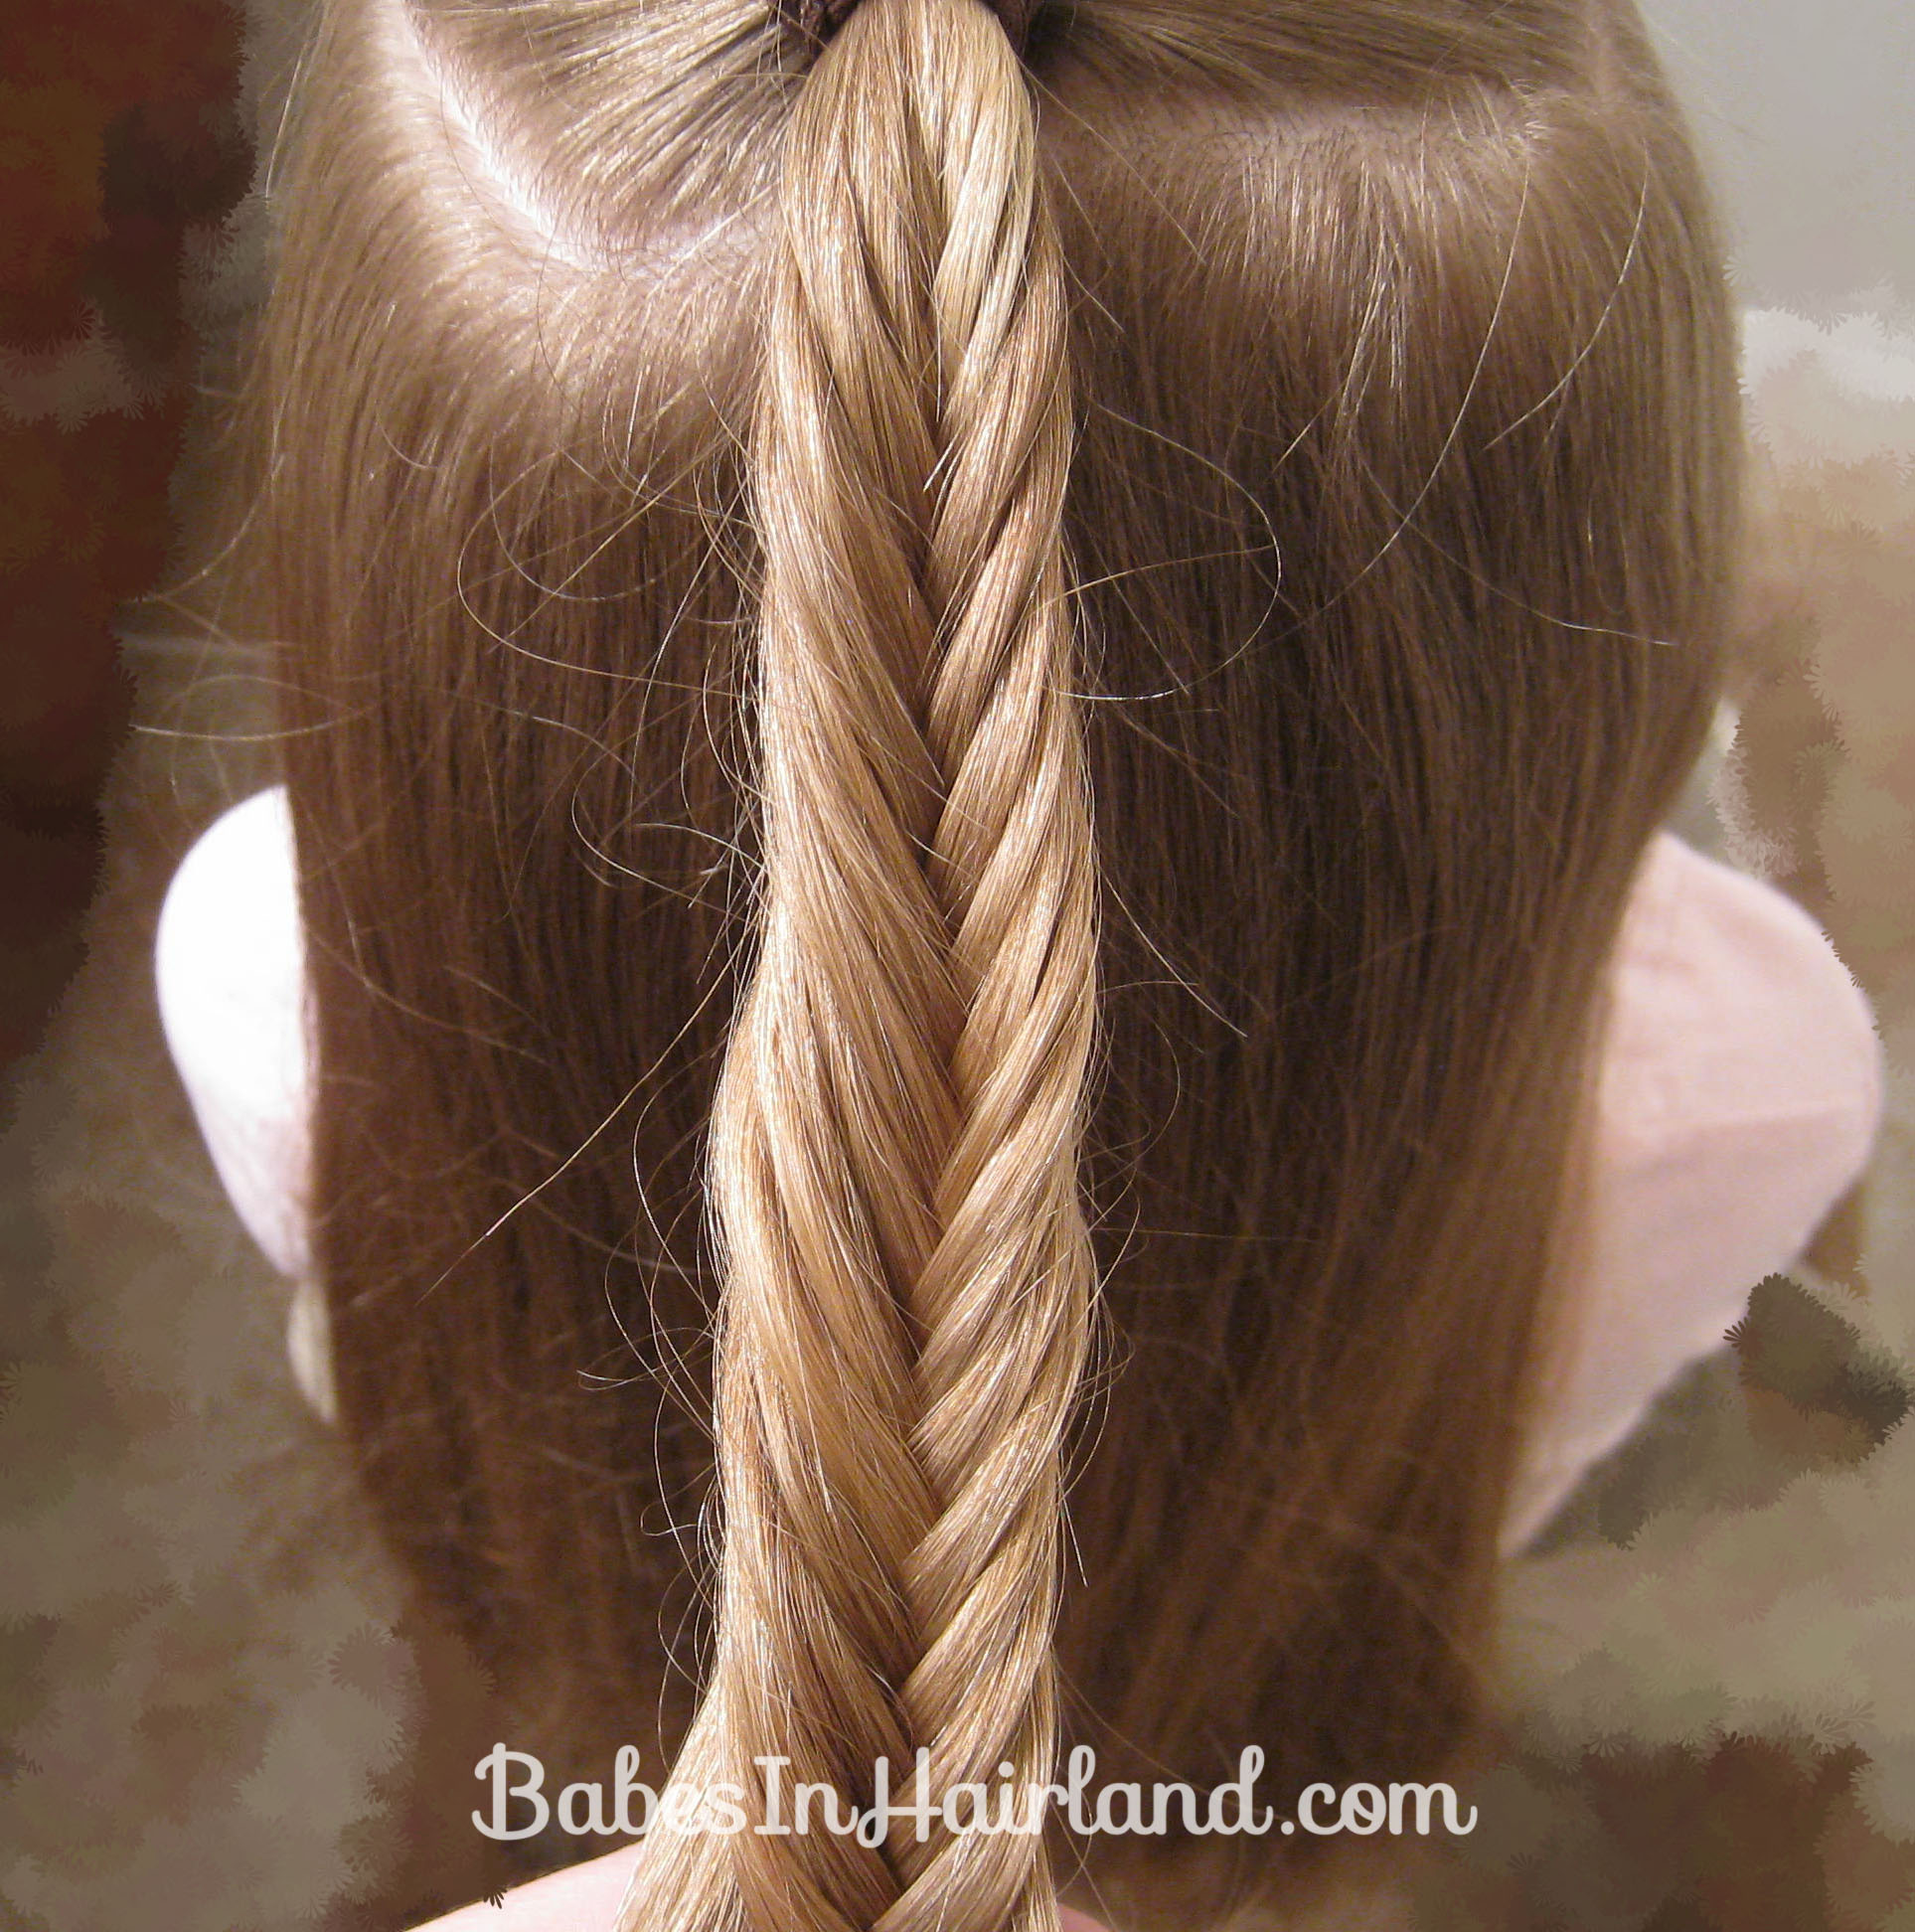 How to Make a Fishbone/Fishtail Braid - Babes In Hairland